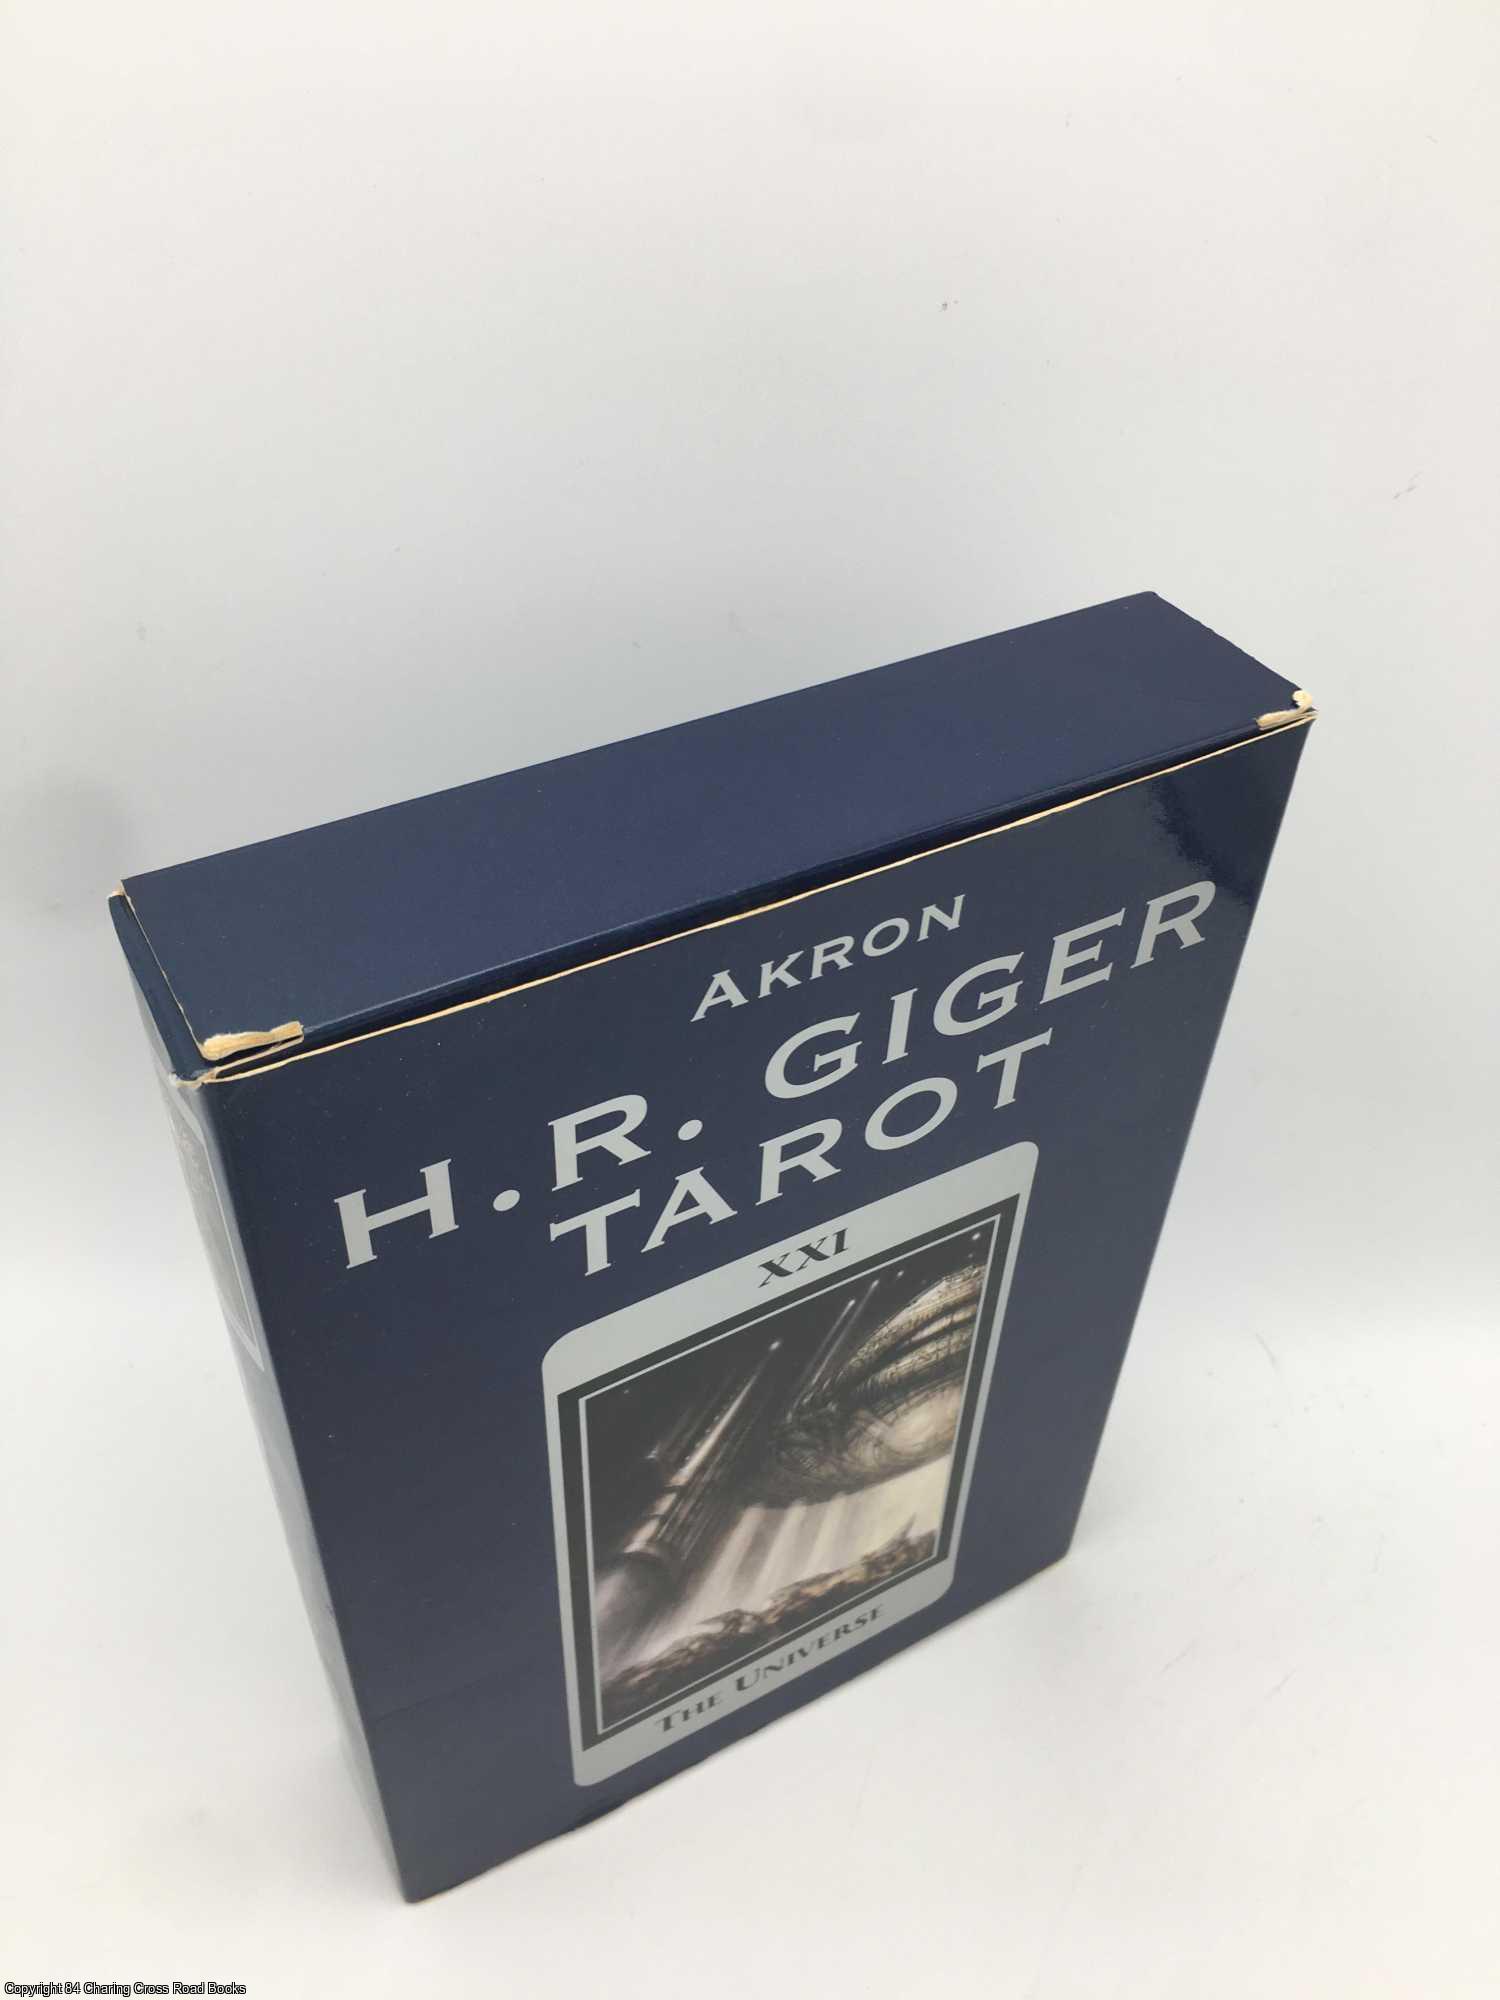 H R Giger Tarot Set by H. R. Giger on 84 Charing Cross Rare Books